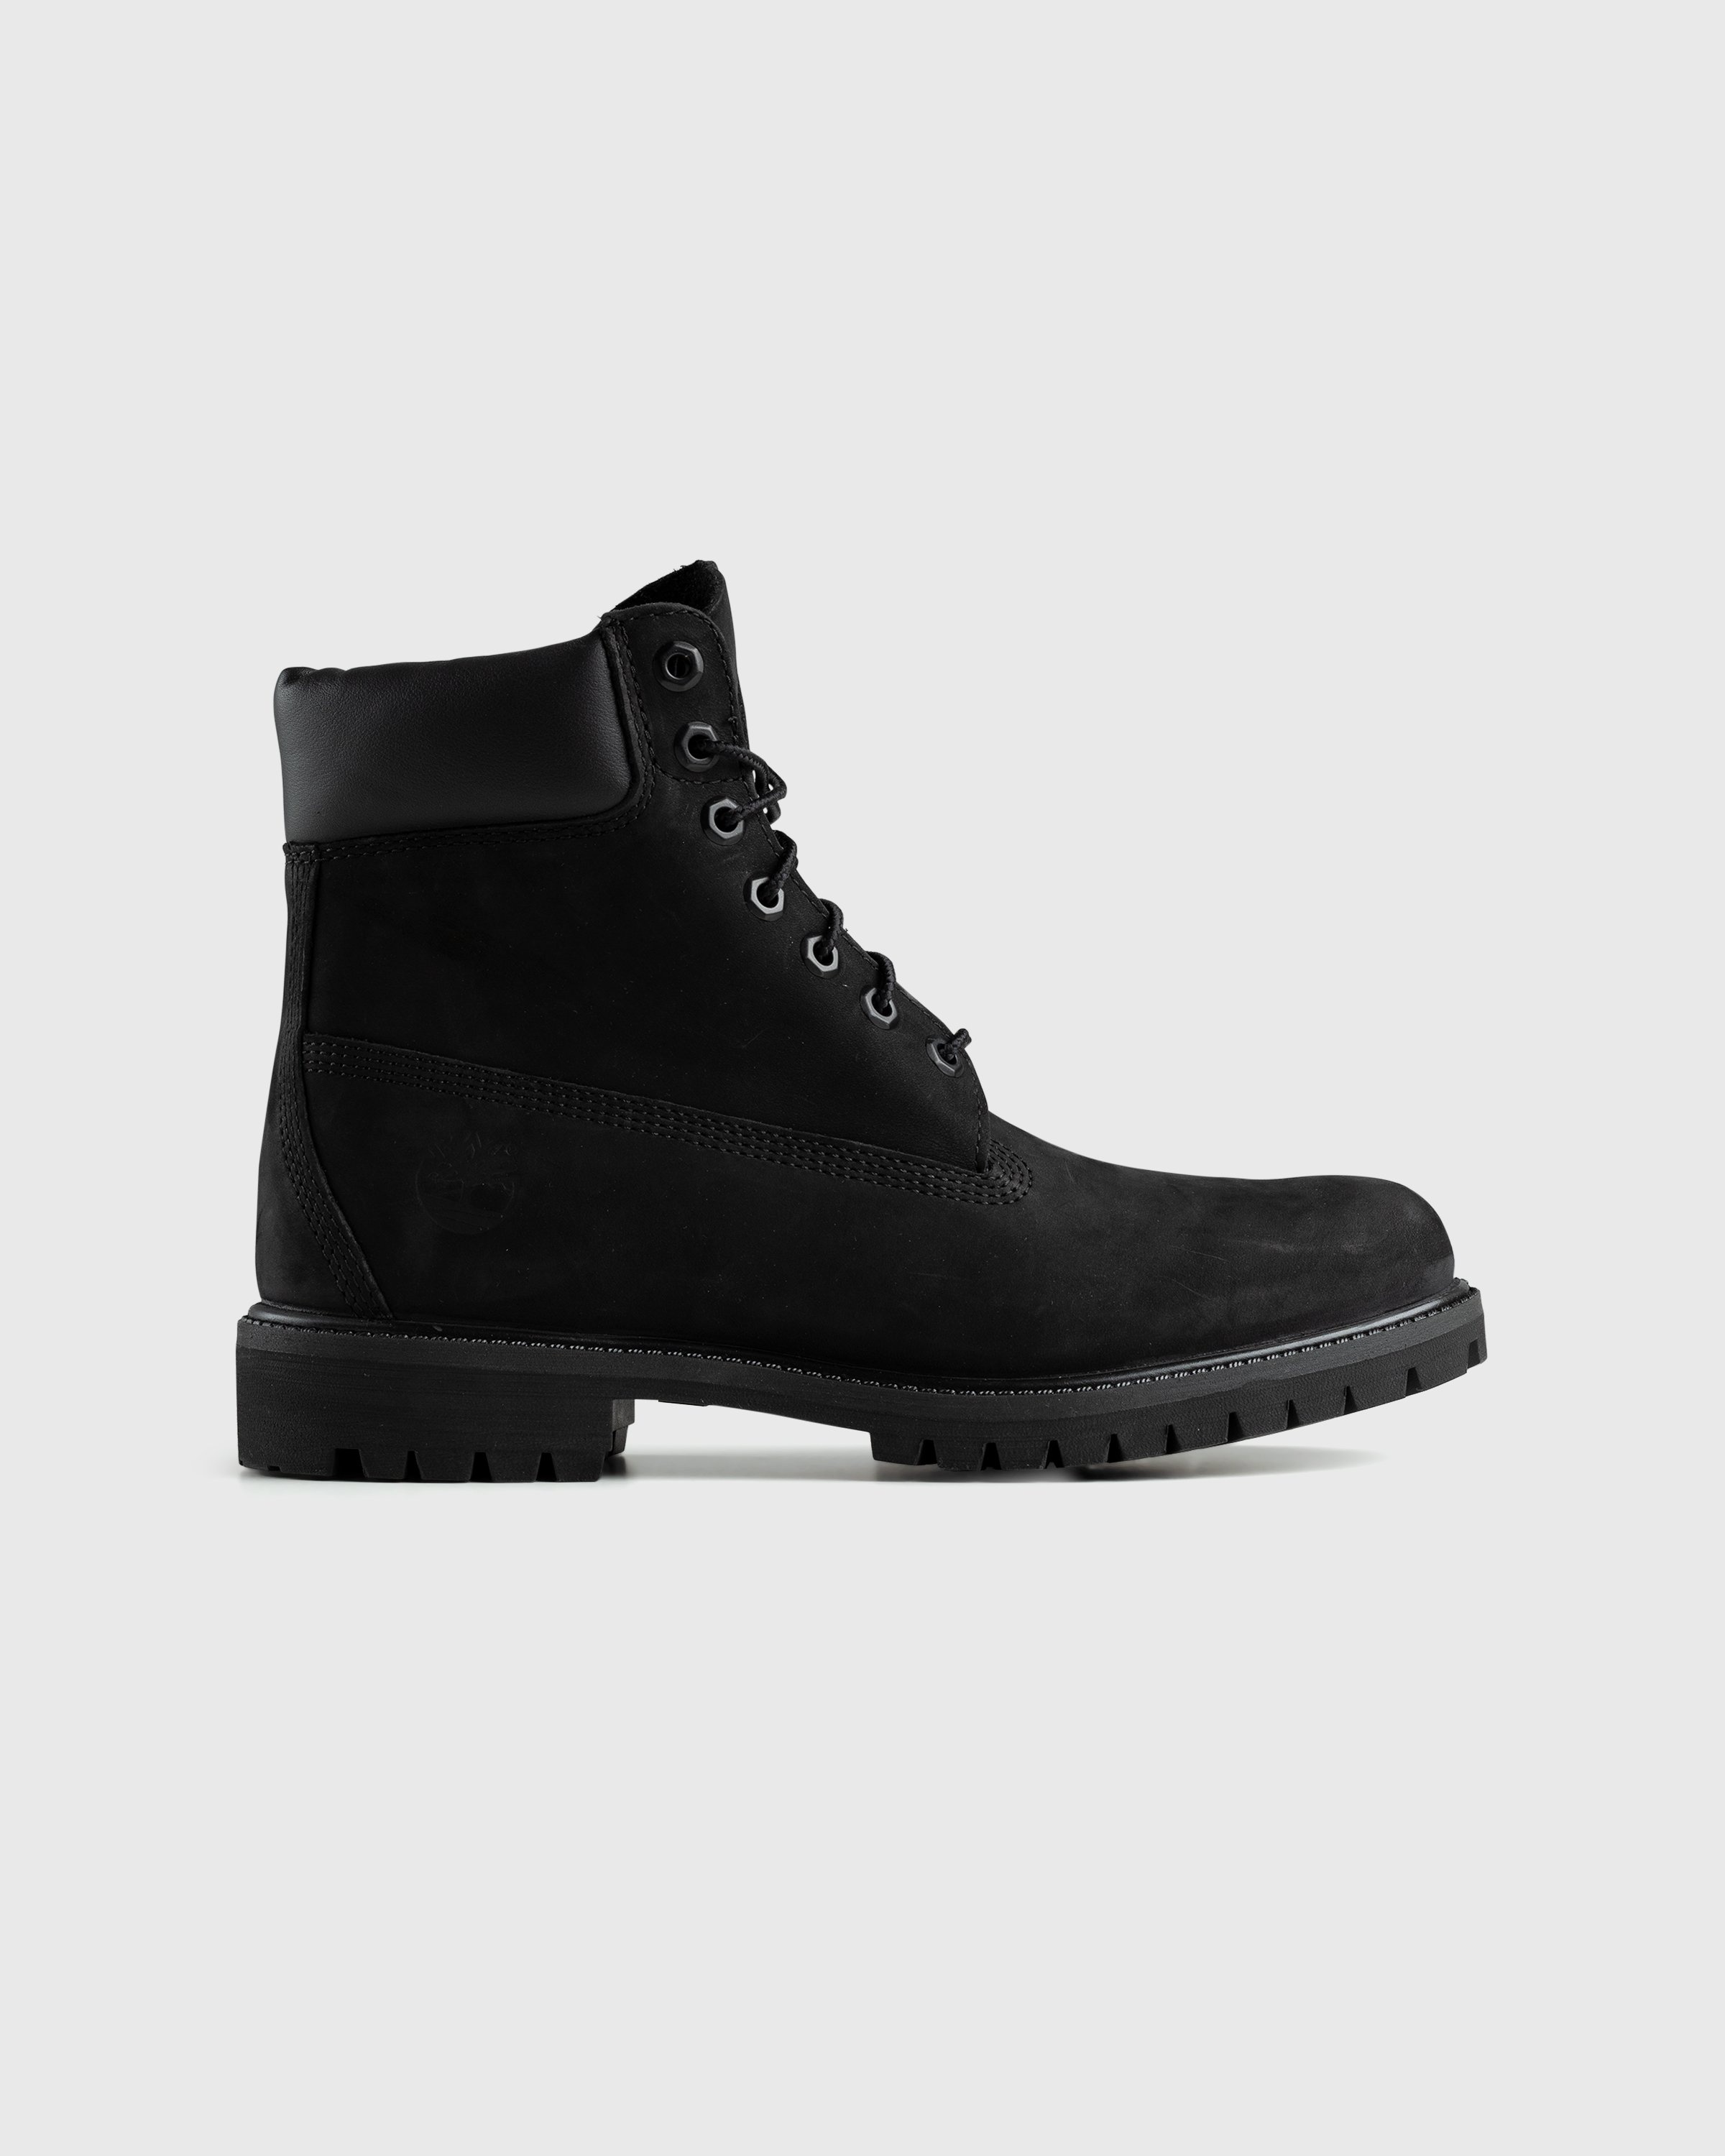 Timberland – 6 Inch Premium Boot Black - Laced Up Boots - Black - Image 1